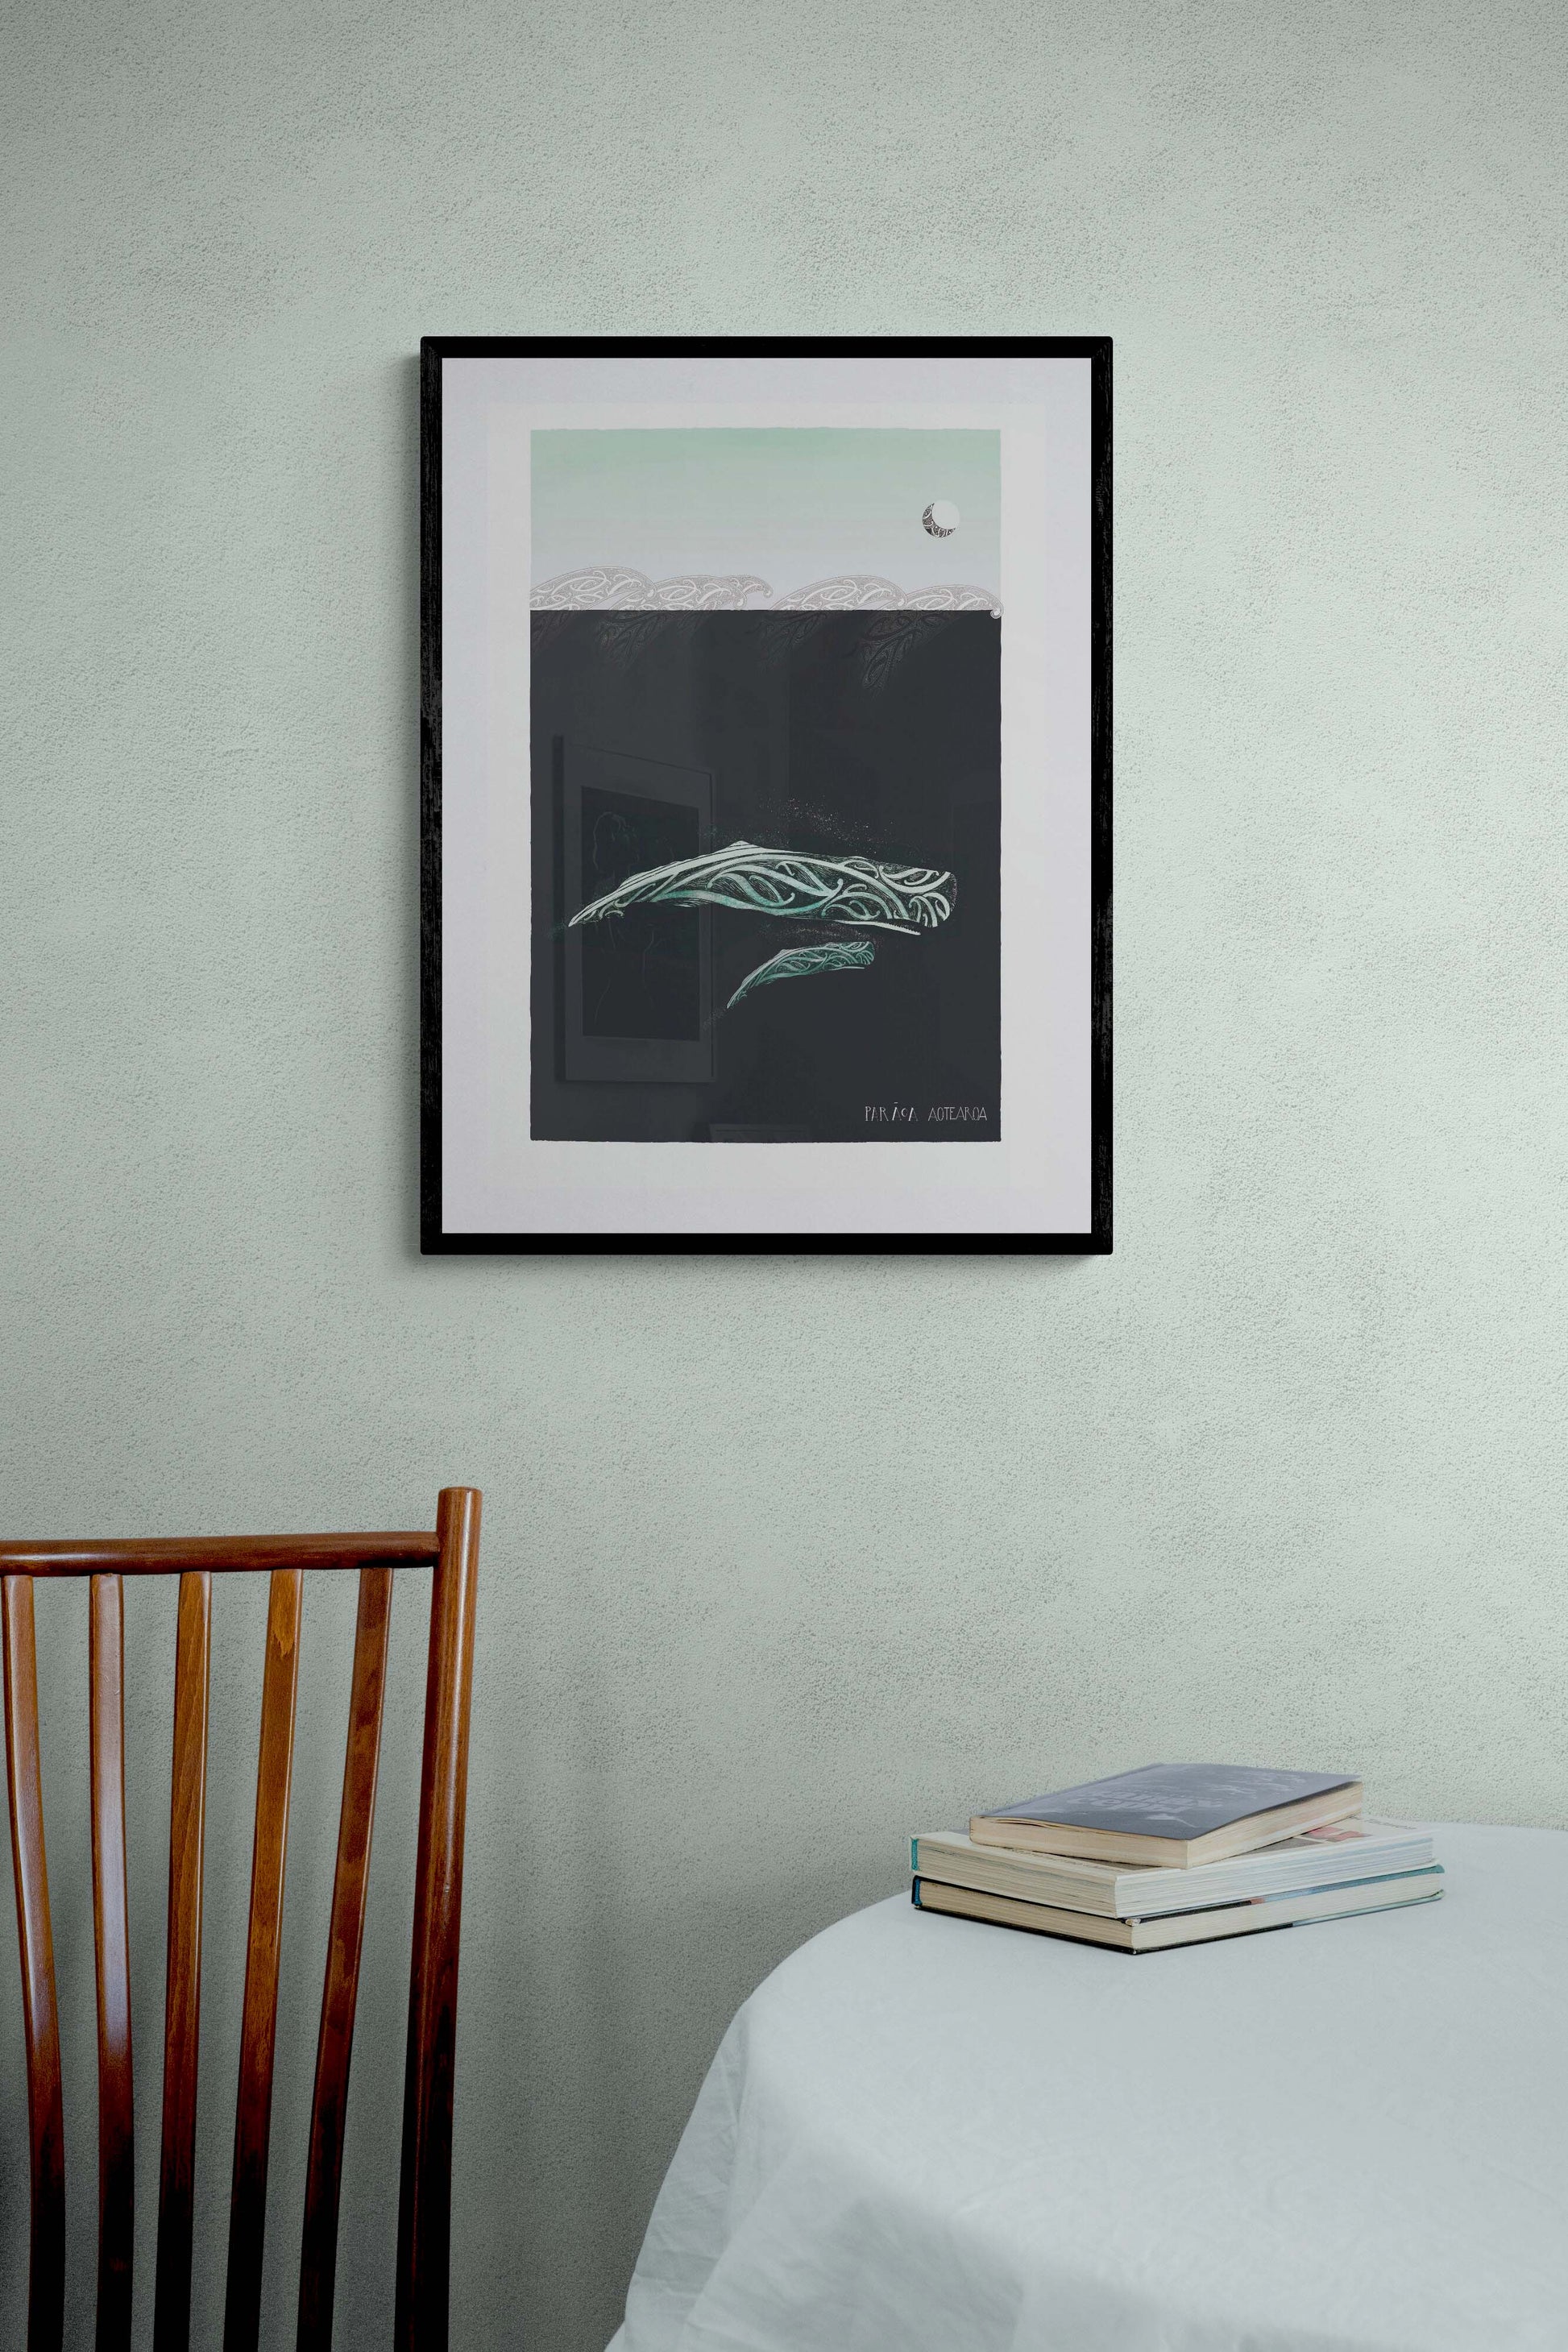 Framed Parāoa whale print with maori art design sperm whale and calf with te reo maori. Limited edition nz art print by Amber Smith